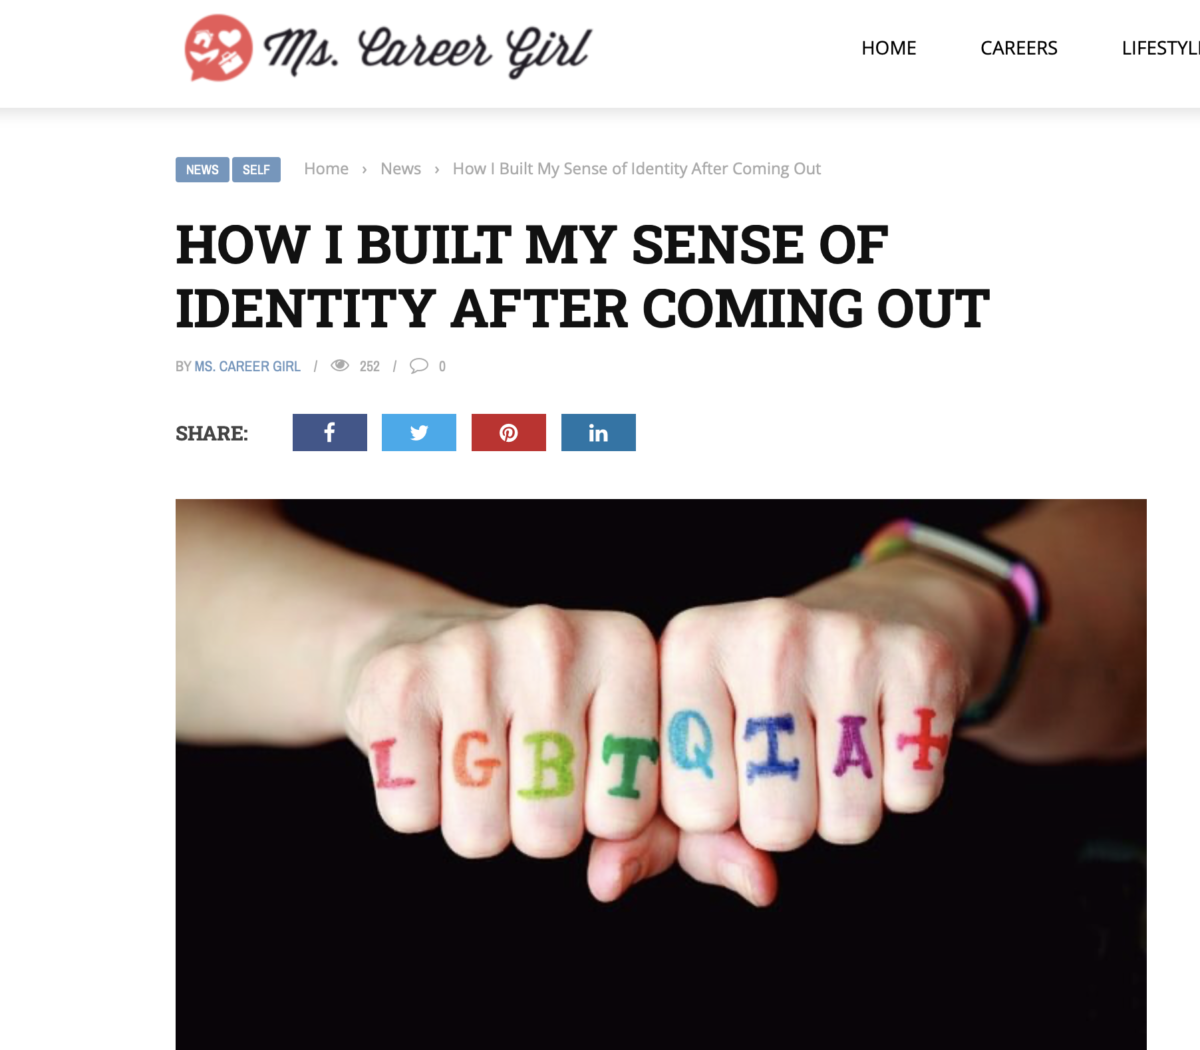 HOW I BUILT MY SENSE OF IDENTITY AFTER COMING OUT